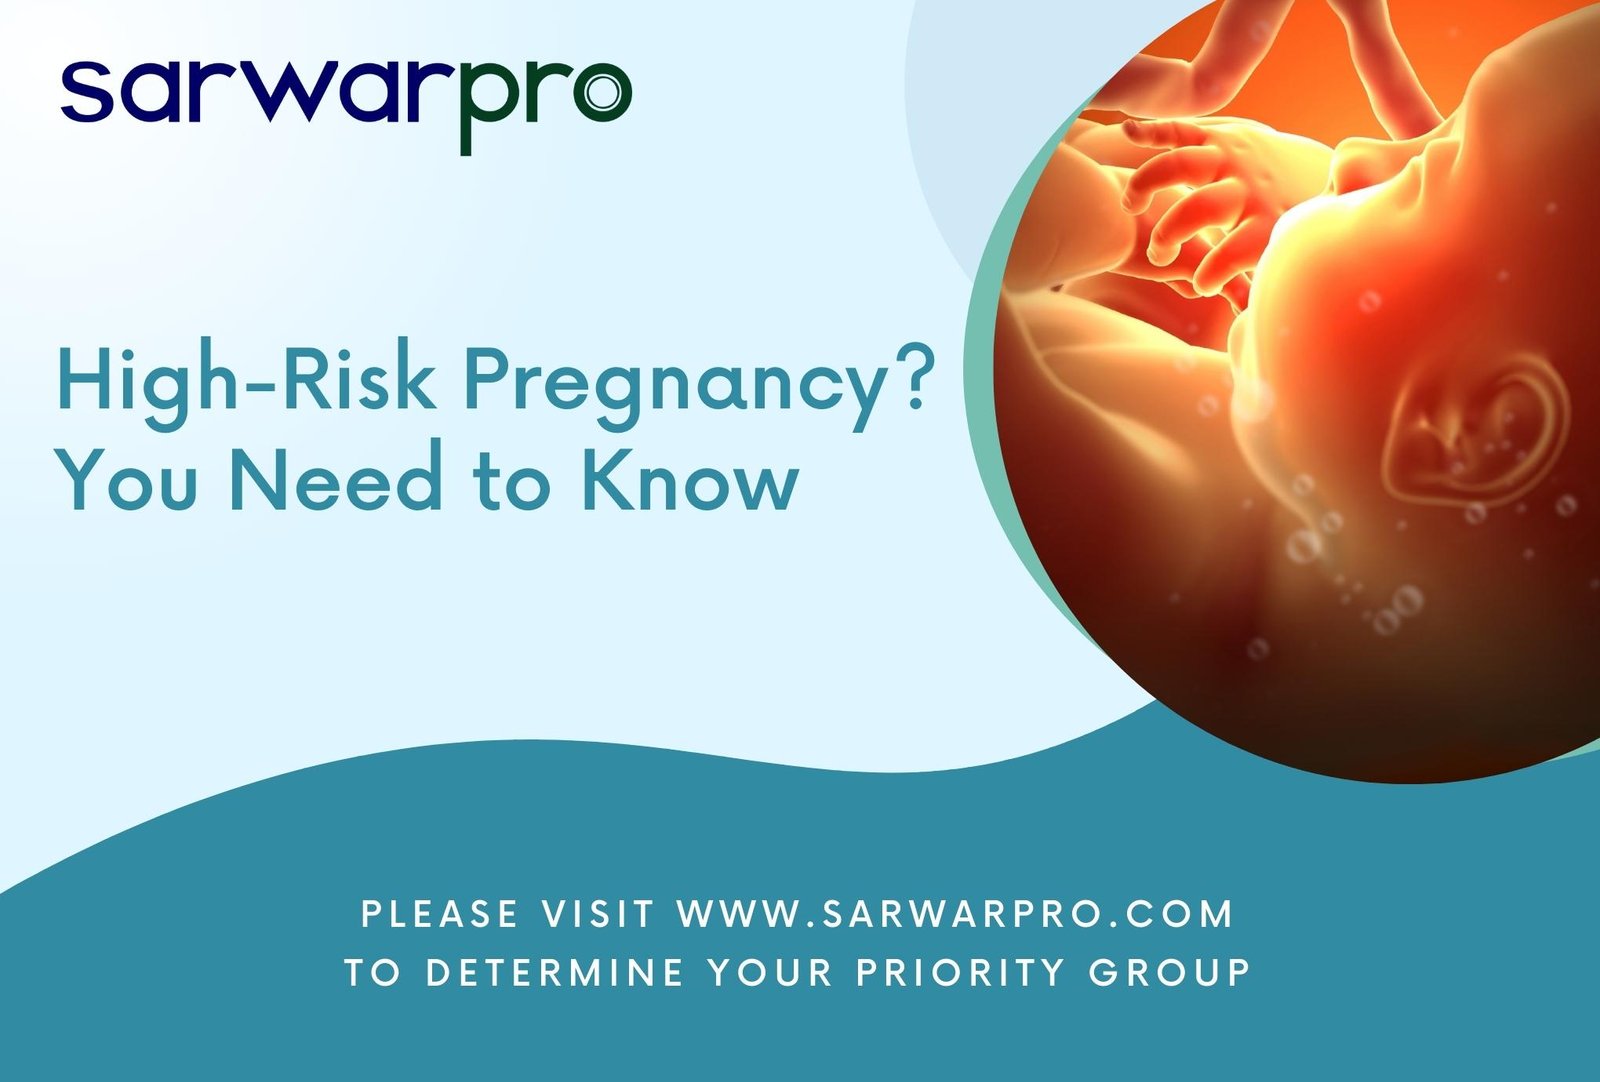 3063high-risk-pregnancy-you-need-to-know.jpg